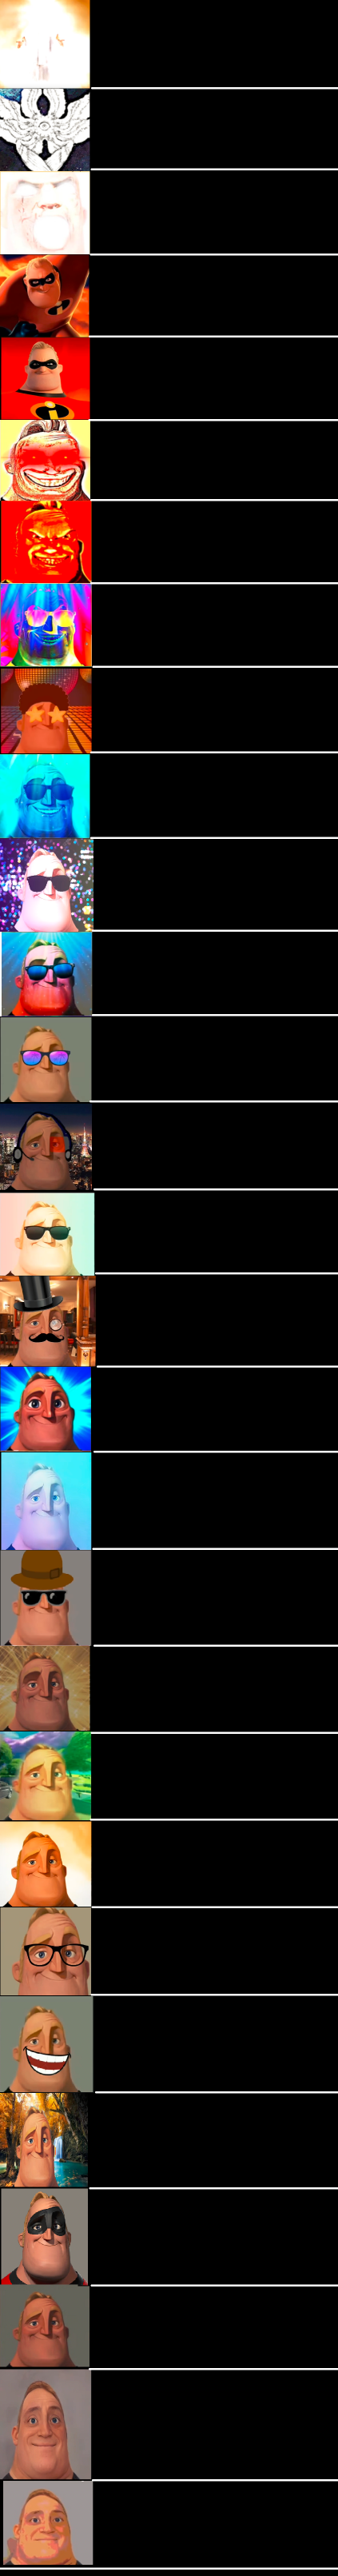 mr-incredible-becoming-ultimate-canny-blank-template-imgflip